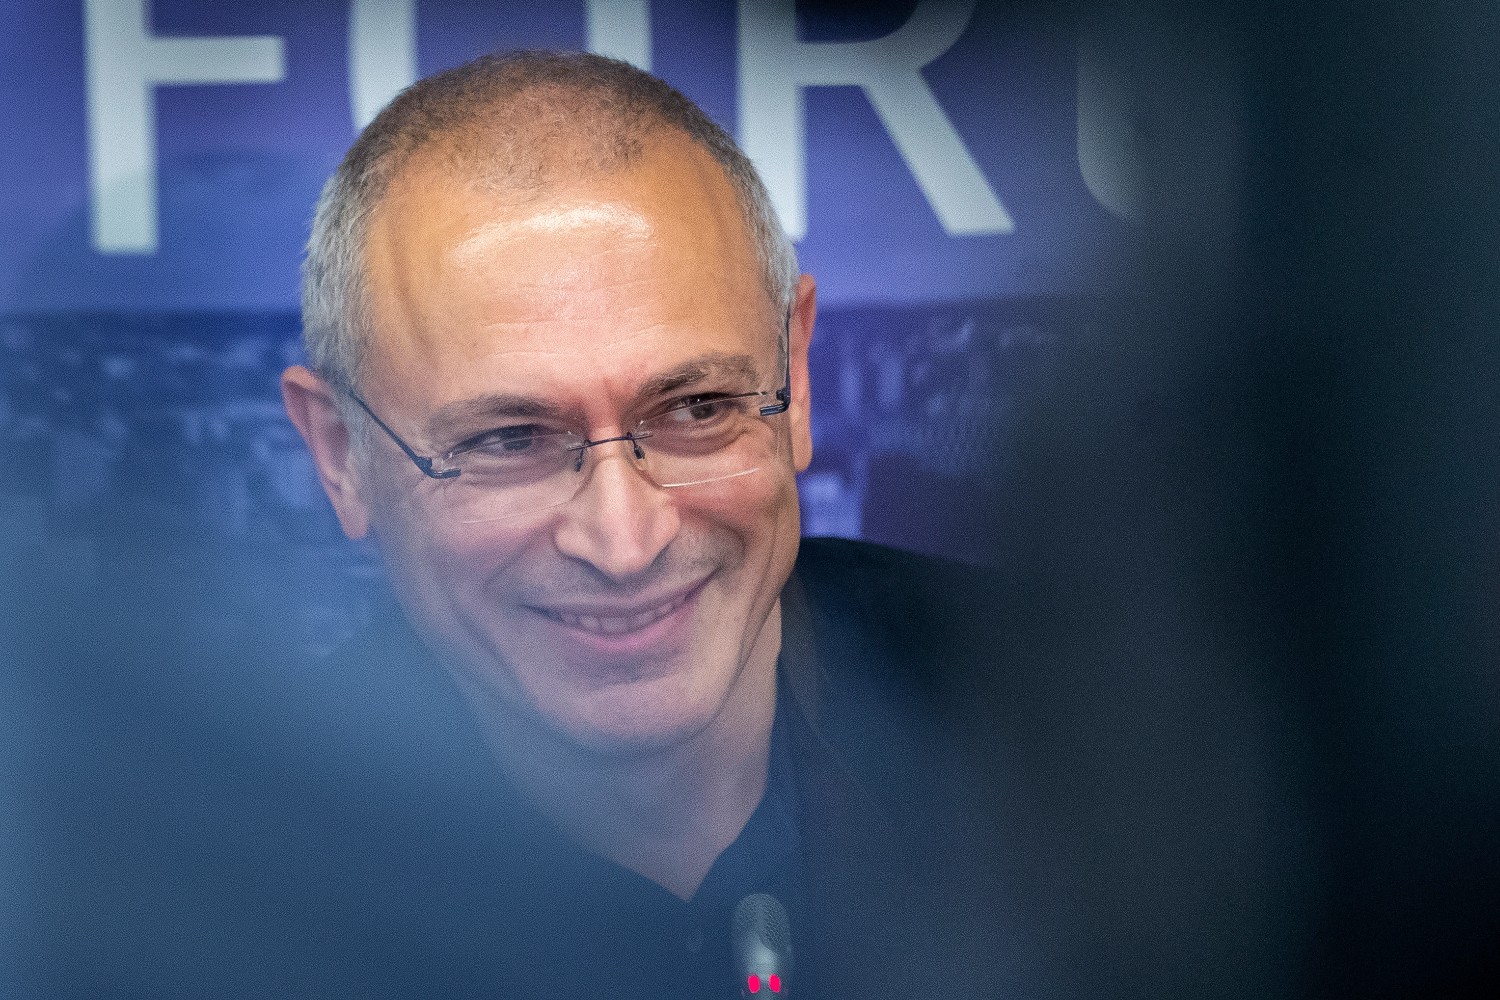 FILE – Russian opposition figure and former owner of the Yukos Oil Company Mikhail Khodorkovsky smiles during a news conference after the Vilnius Russia Forum at the “Esperanza” hotel in Paunguriai village, Trakai district west of the capital Vilnius, Lithuania, on Aug. 20, 2021. The Dutch Supreme Court is ruling Friday, Nov. 5, 2021 in a $50 billion legal battle between Russia and former shareholders of the country’s bankrupted oil giant Yukos. (AP Photo/Mindaugas Kulbis, File)